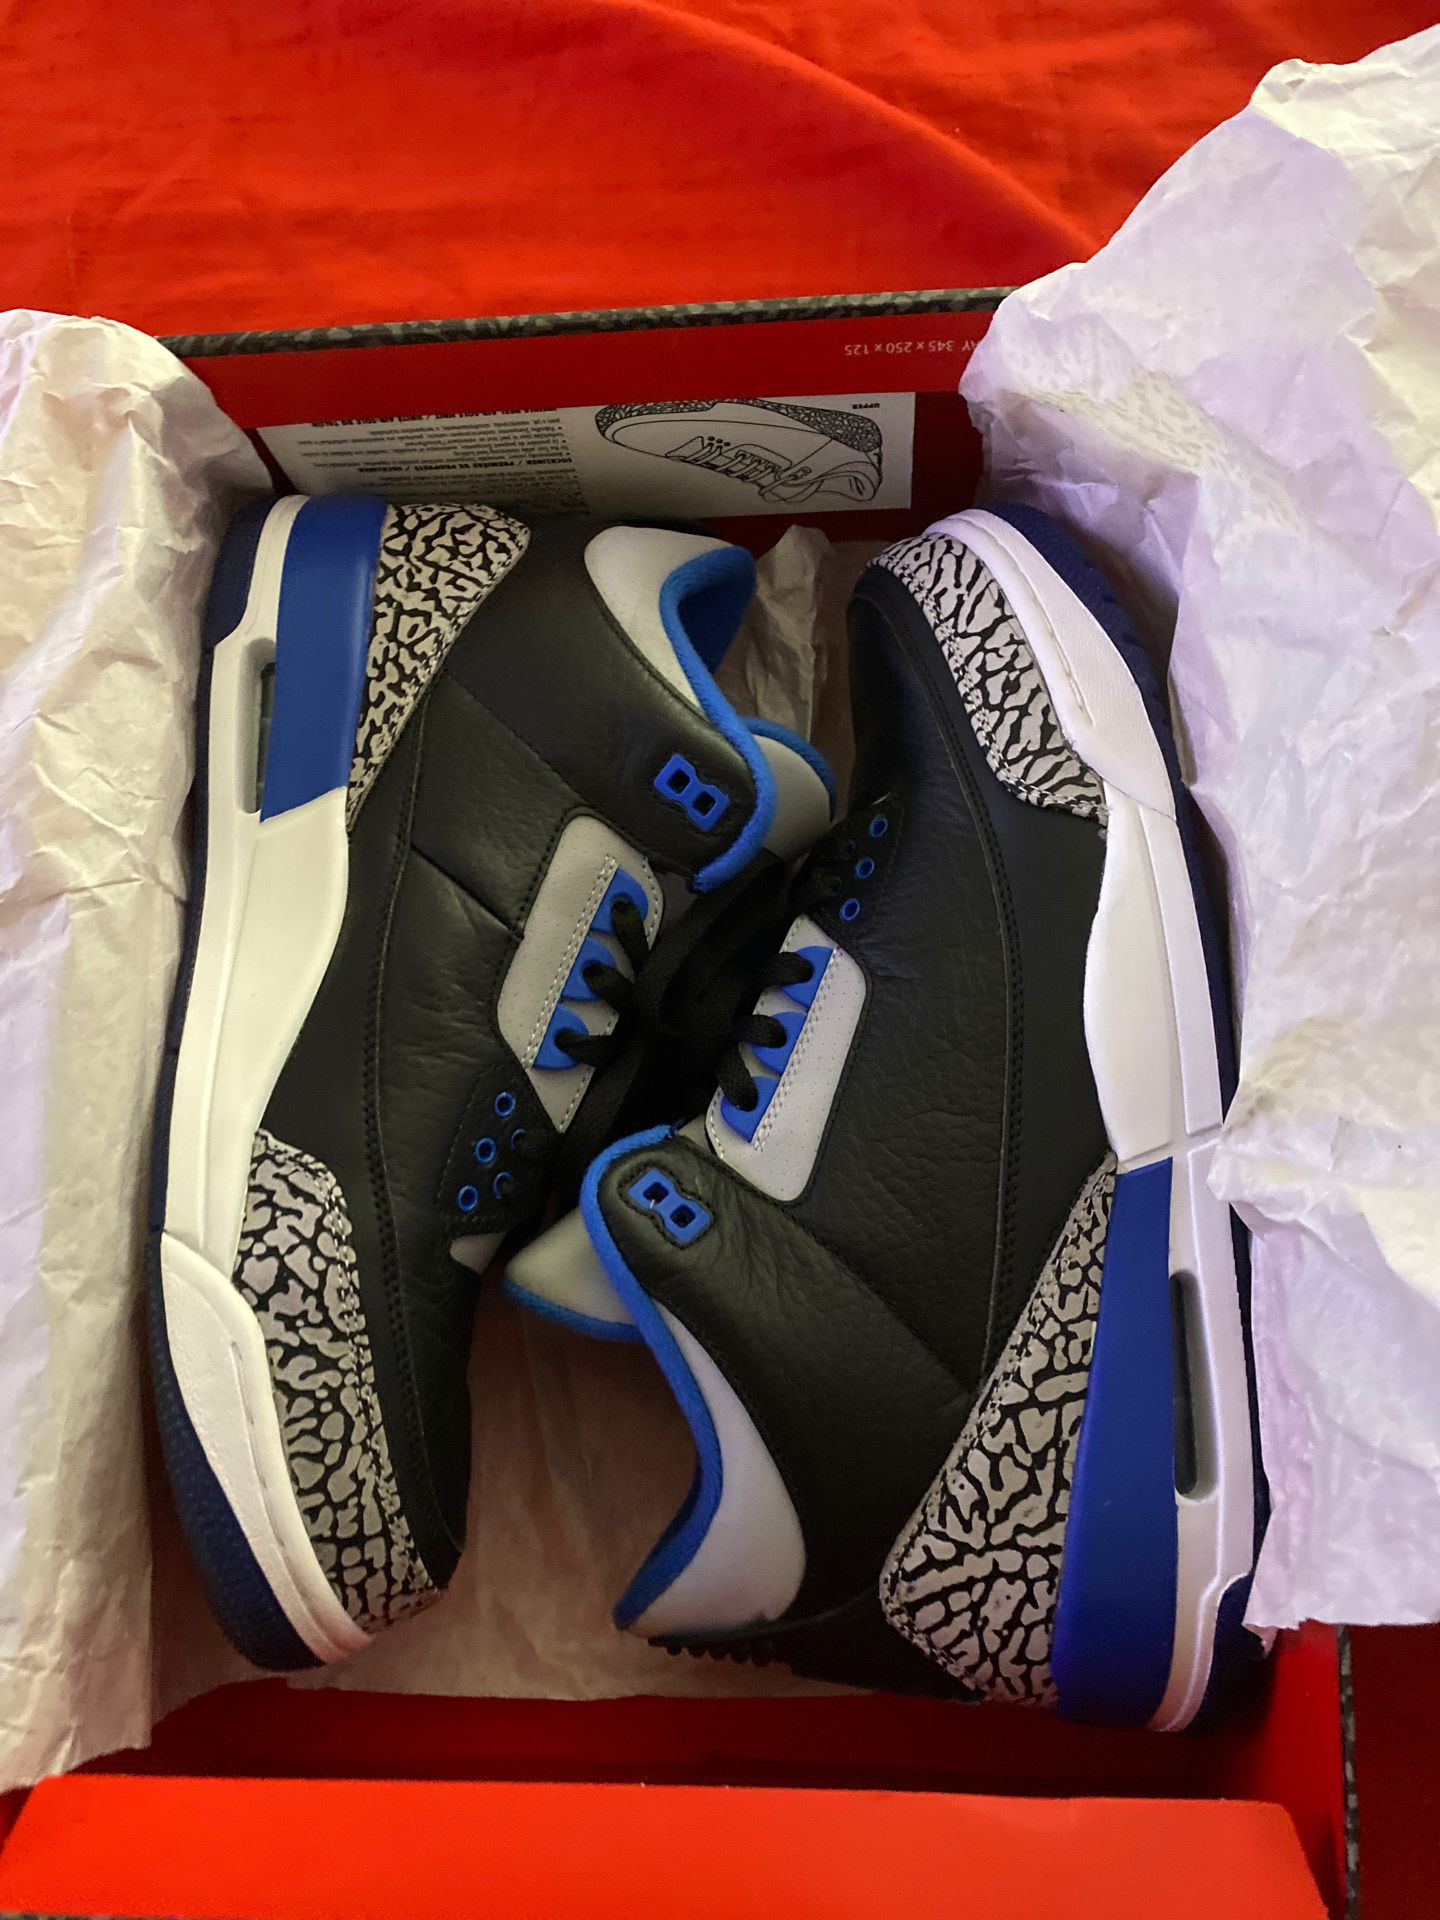 Jordan 3 no trades no lowball offers .Shoes excellent condition they are size 11 with OG box